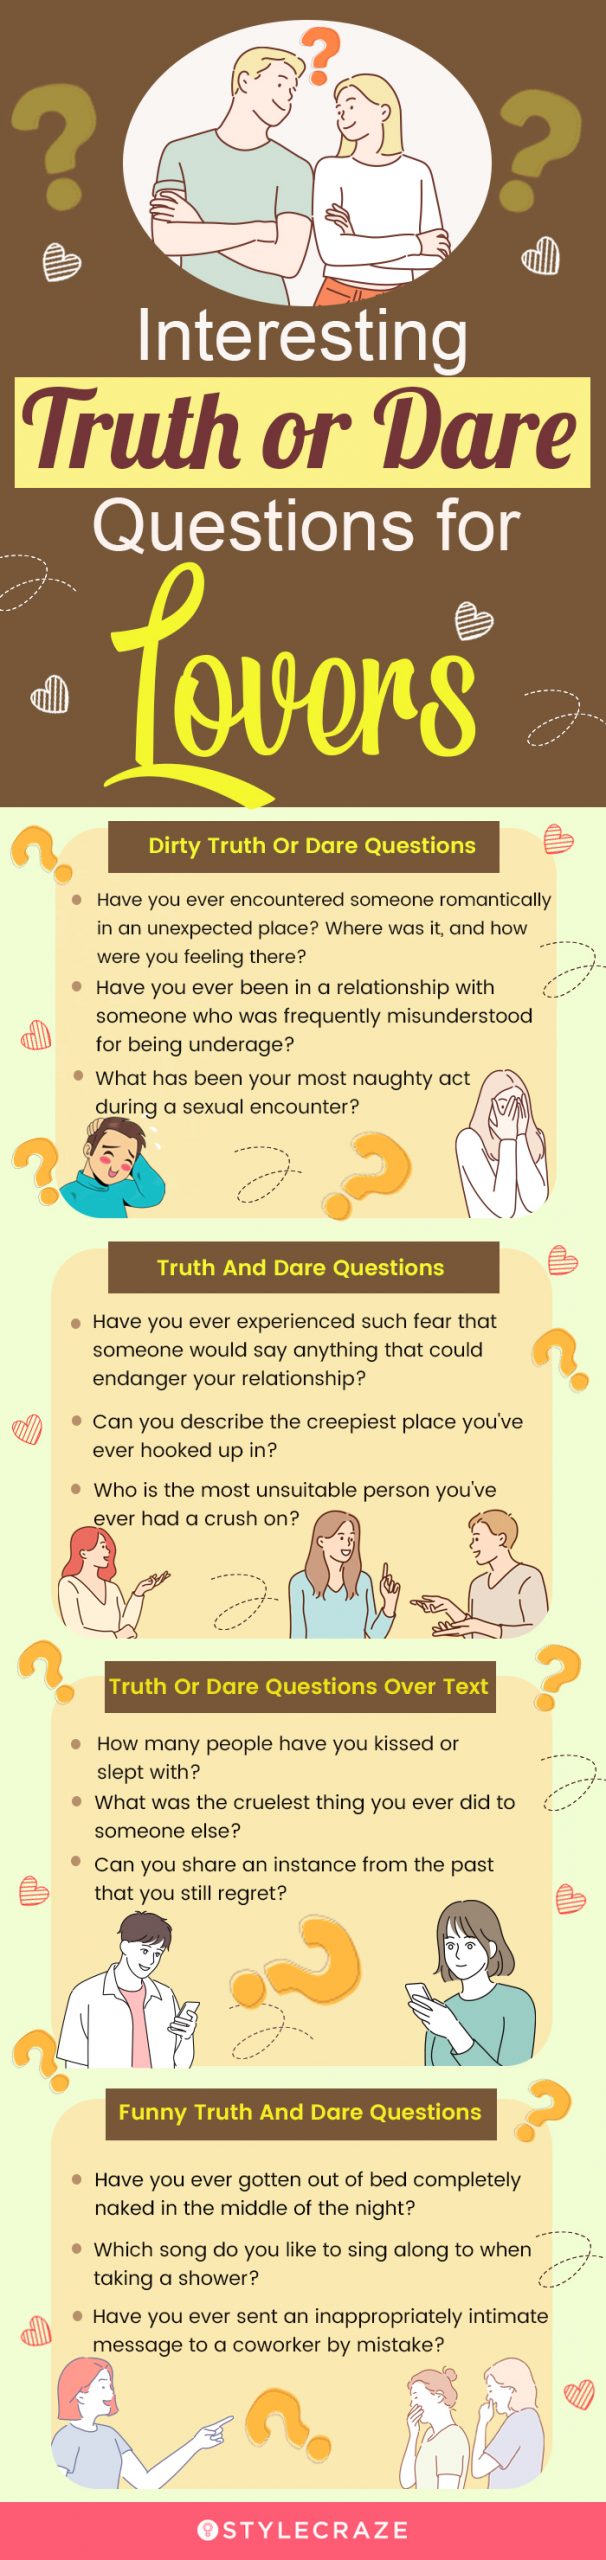 interesting truth or dare questions for lovers (infographic)